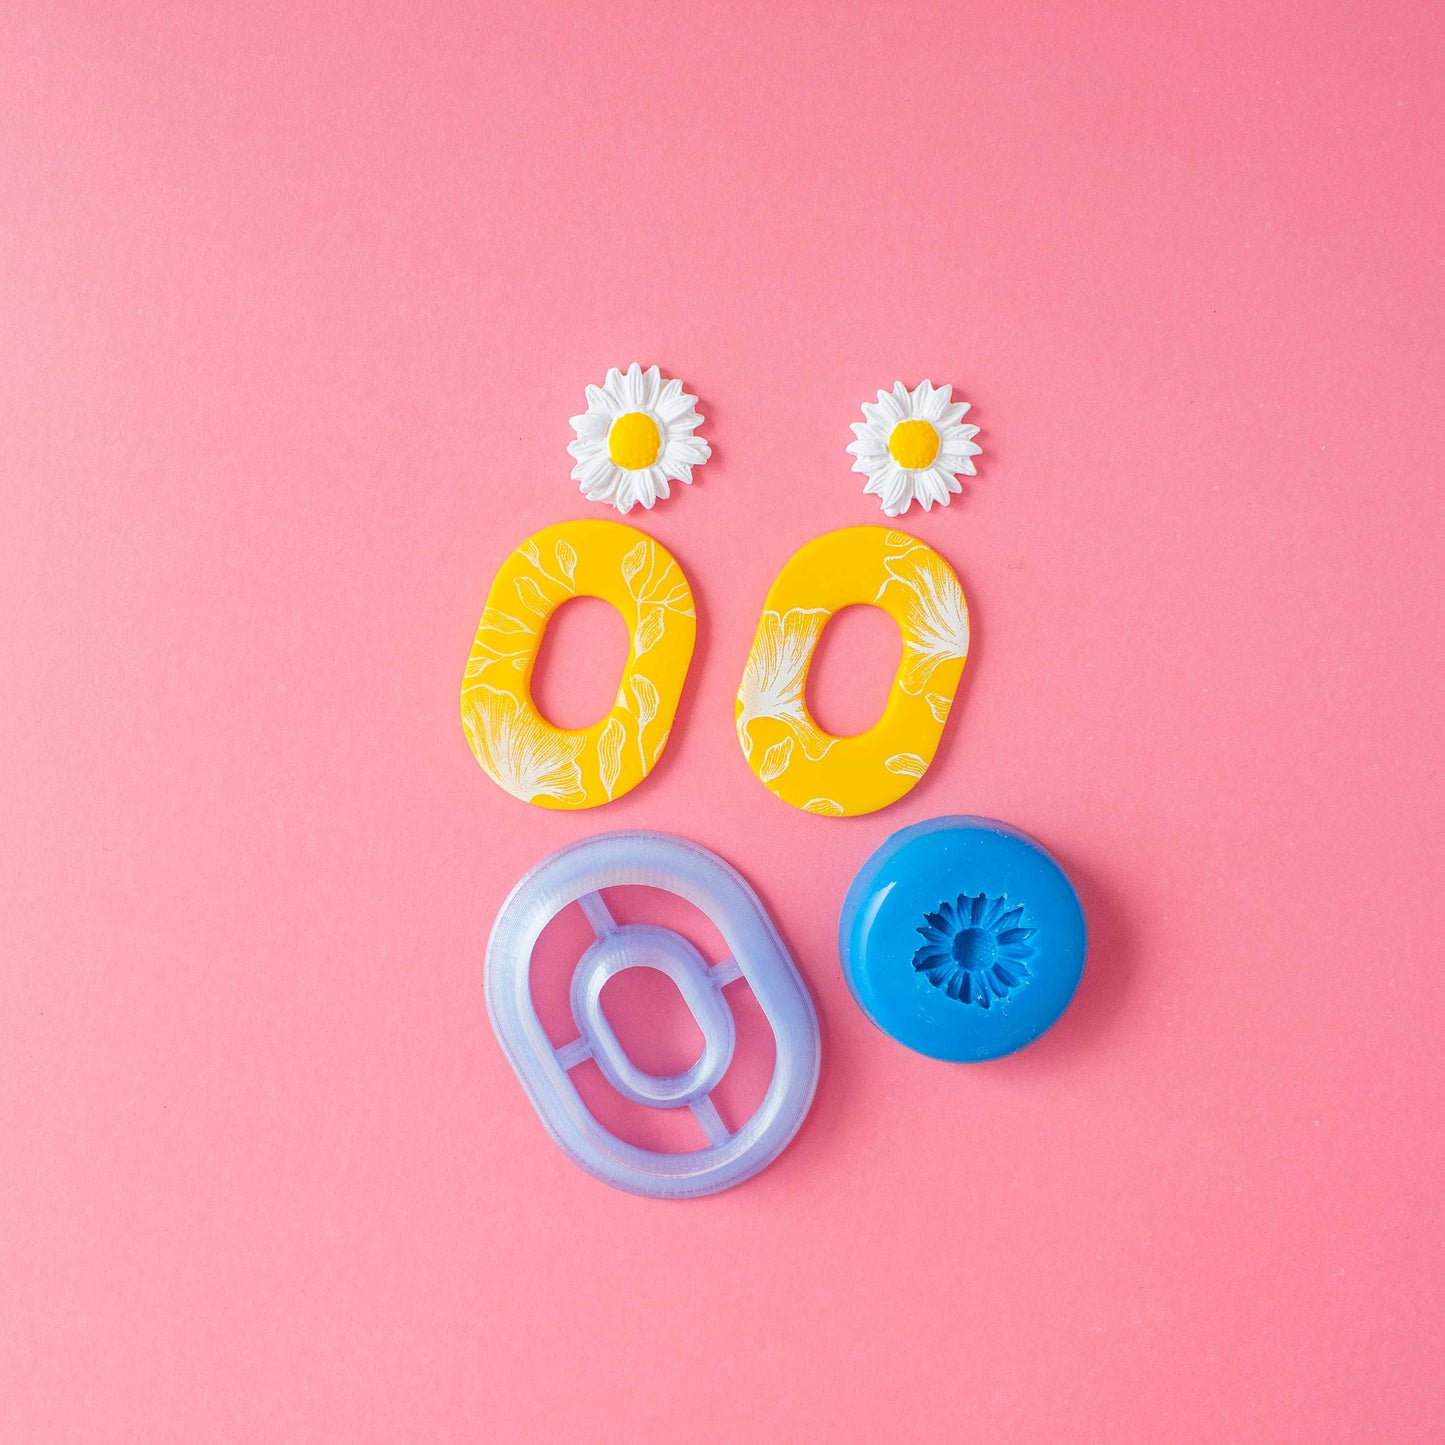 Double oval polymer clay cutter, a daisy silicon mold and a set of oval earrings in a pink background.